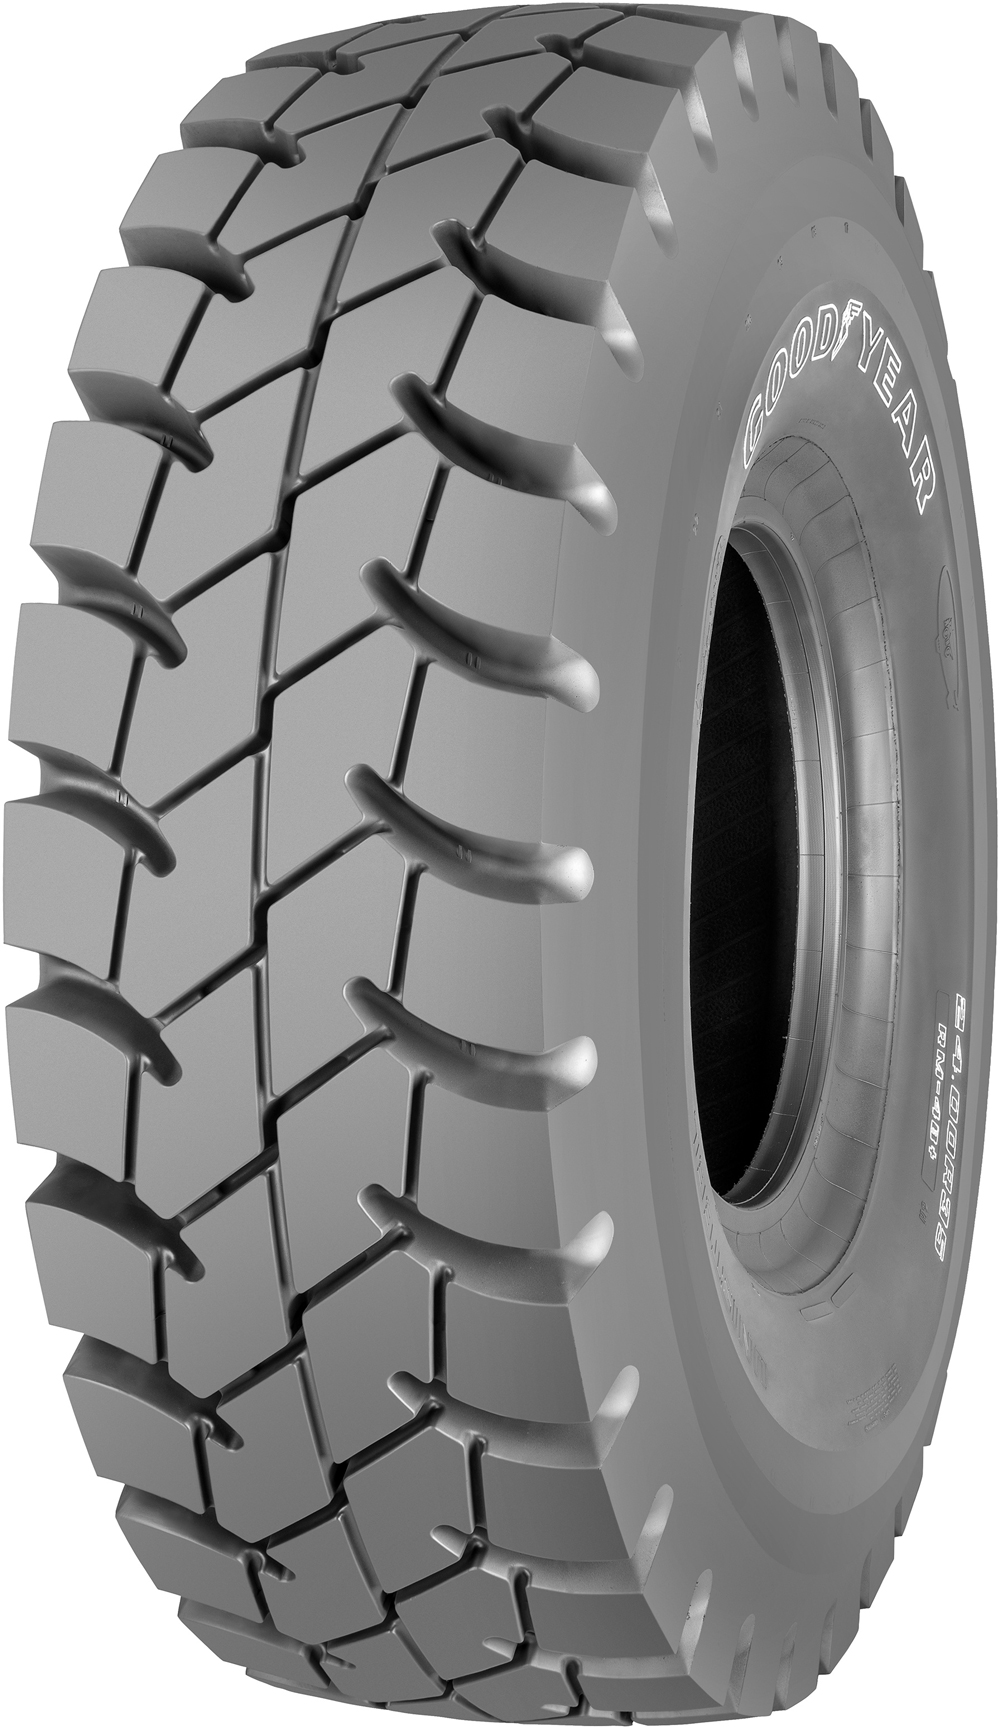 product_type-industrial_tires GOODYEAR RM-4B+ TL 24 R35 209B